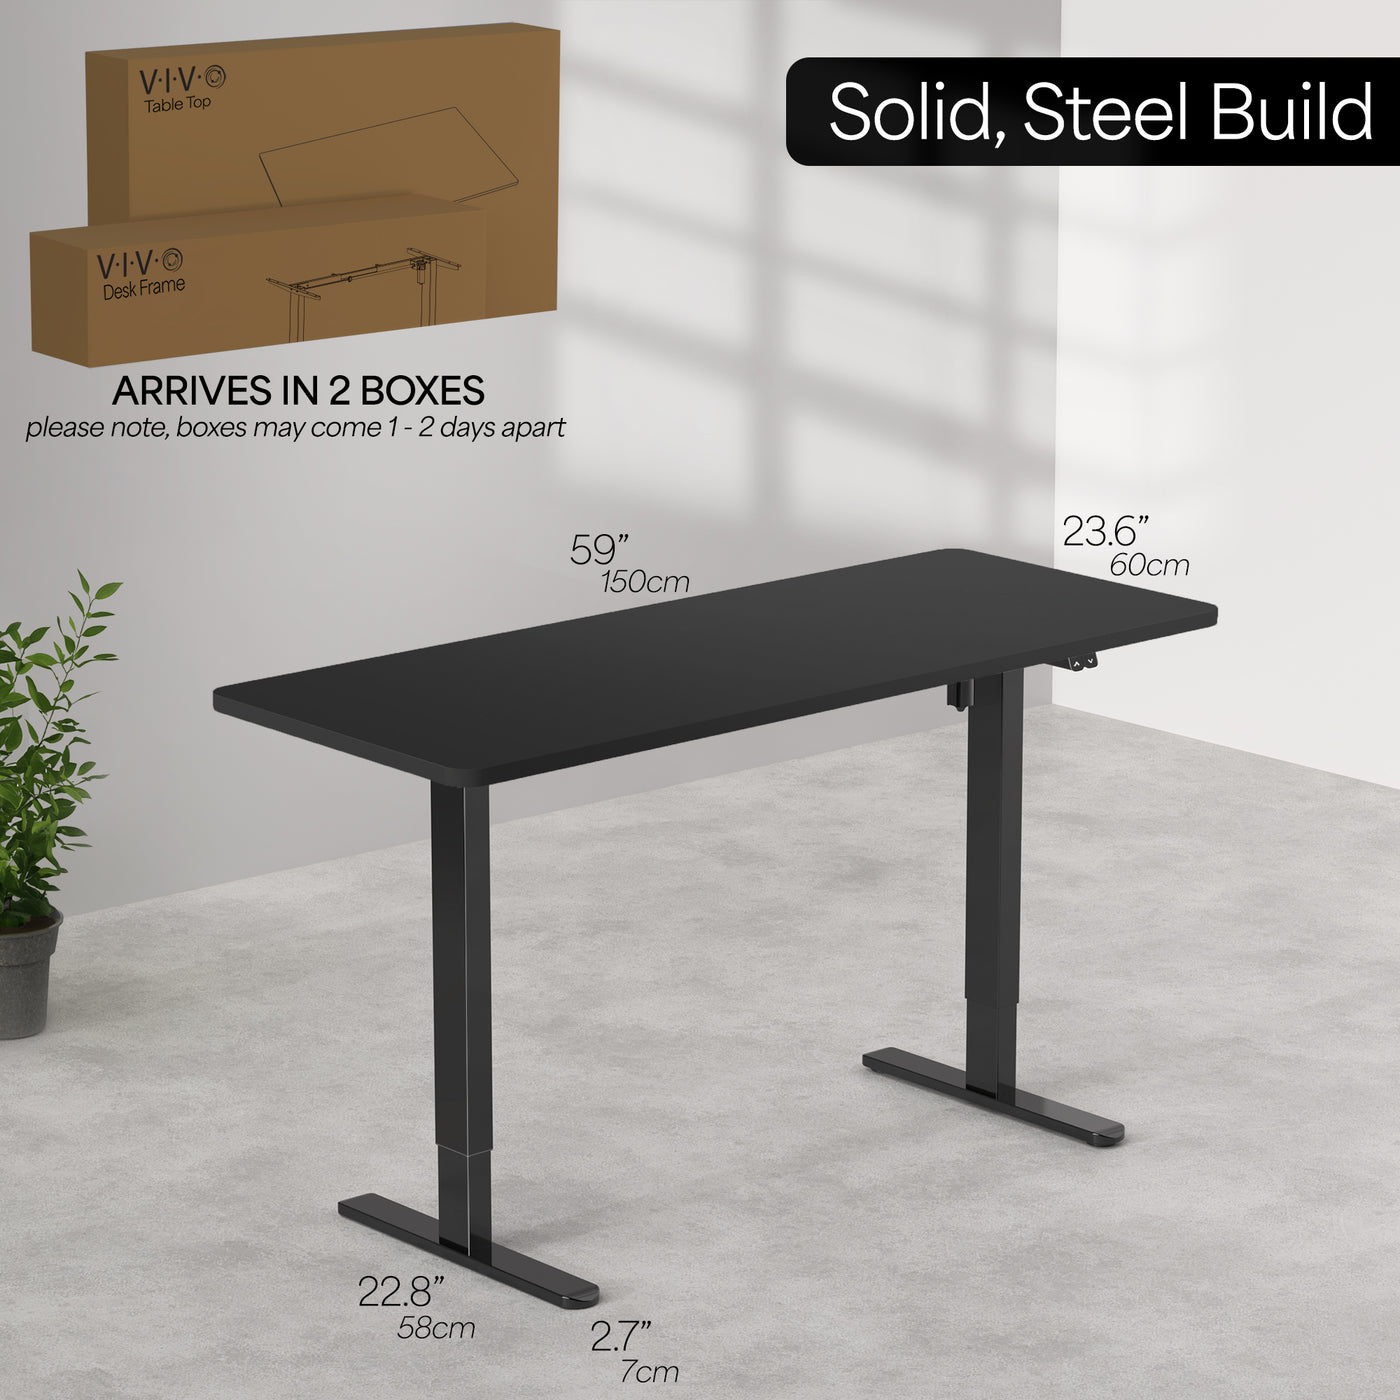 Heavy-duty electric height adjustable desktop workstation dimensions. Desk parts ship in two separate boxes and may arrive on separate days.